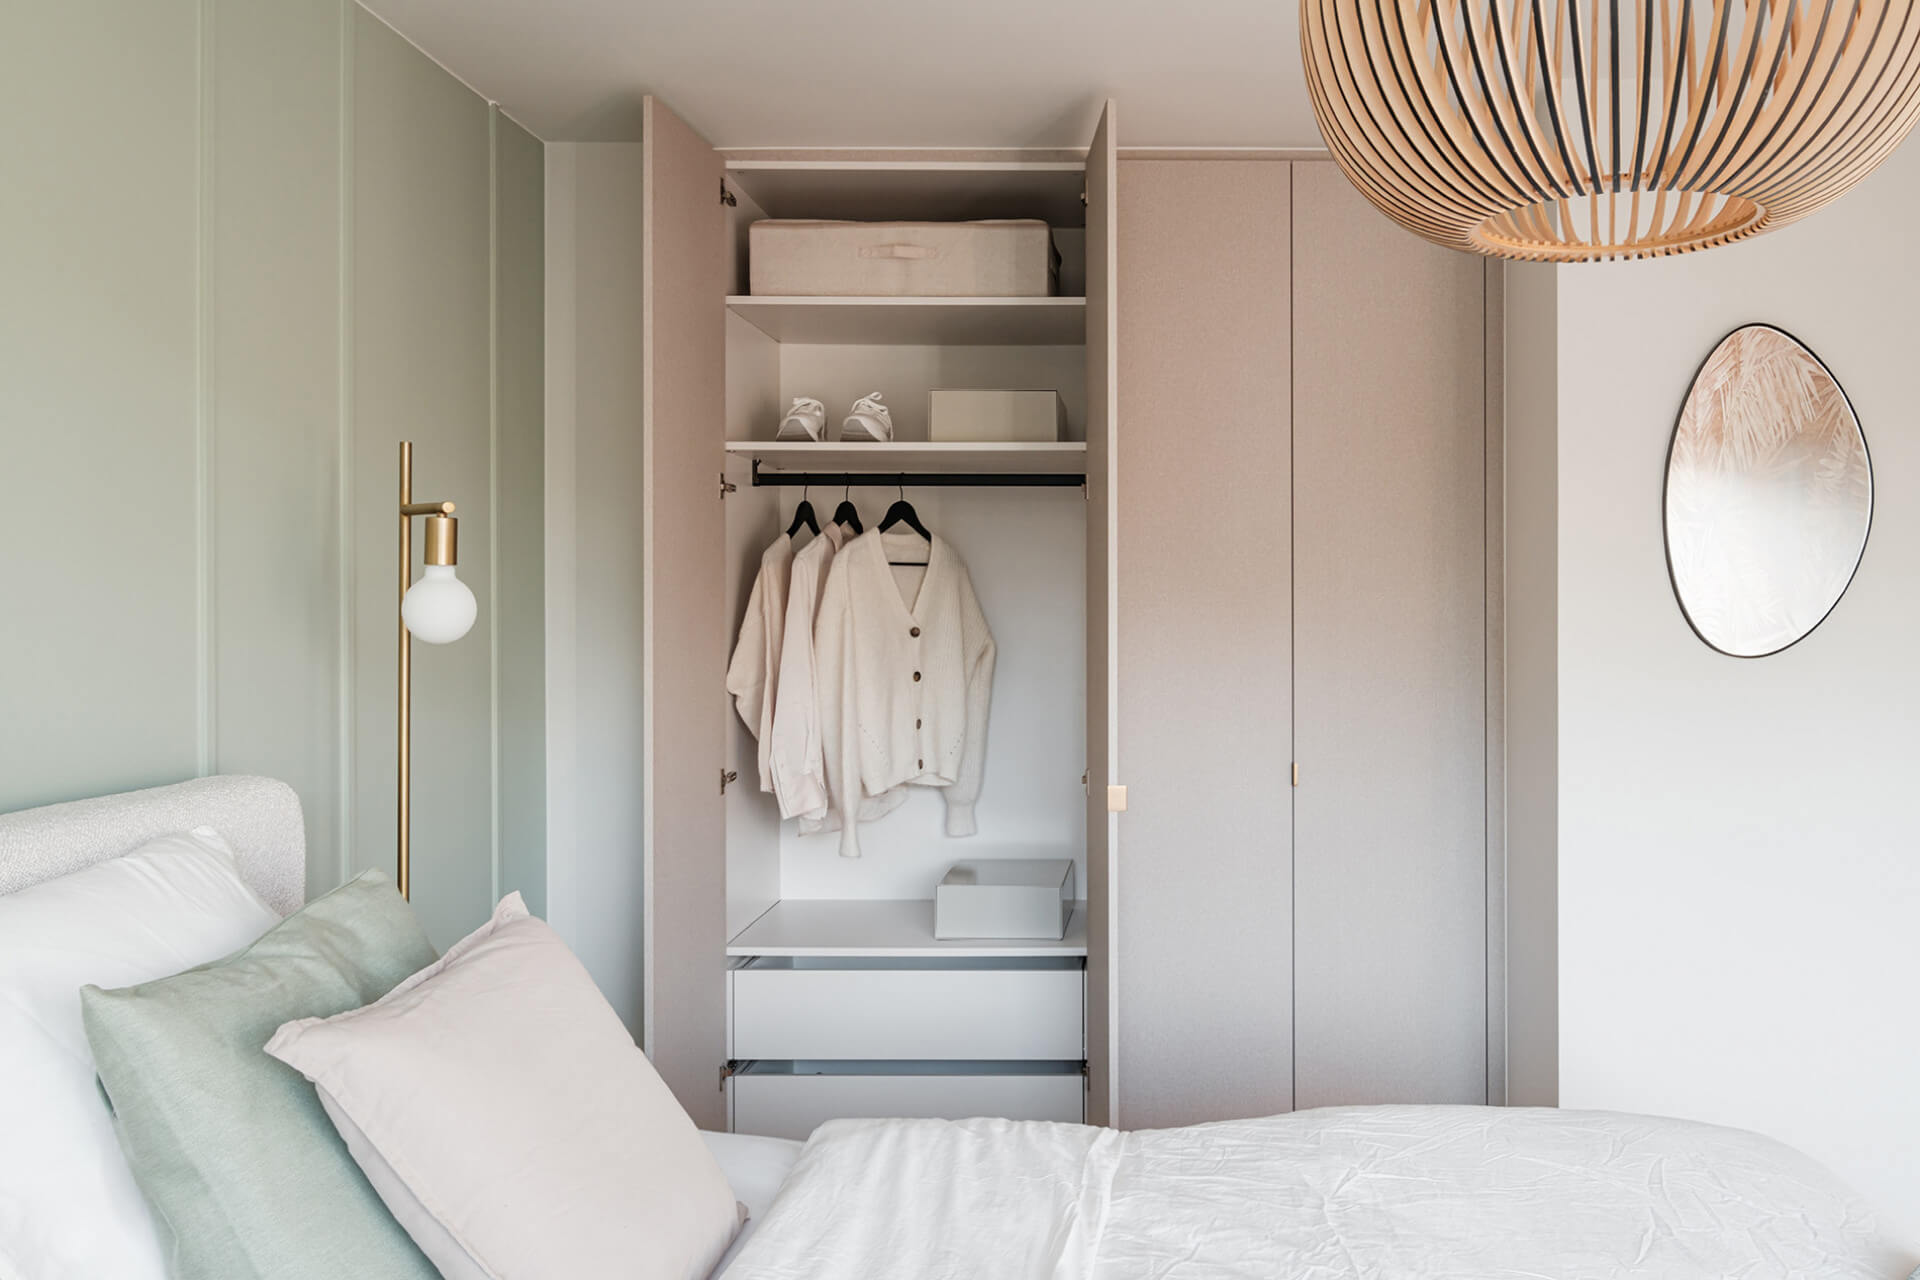 Bedroom with a built-in wardrobe